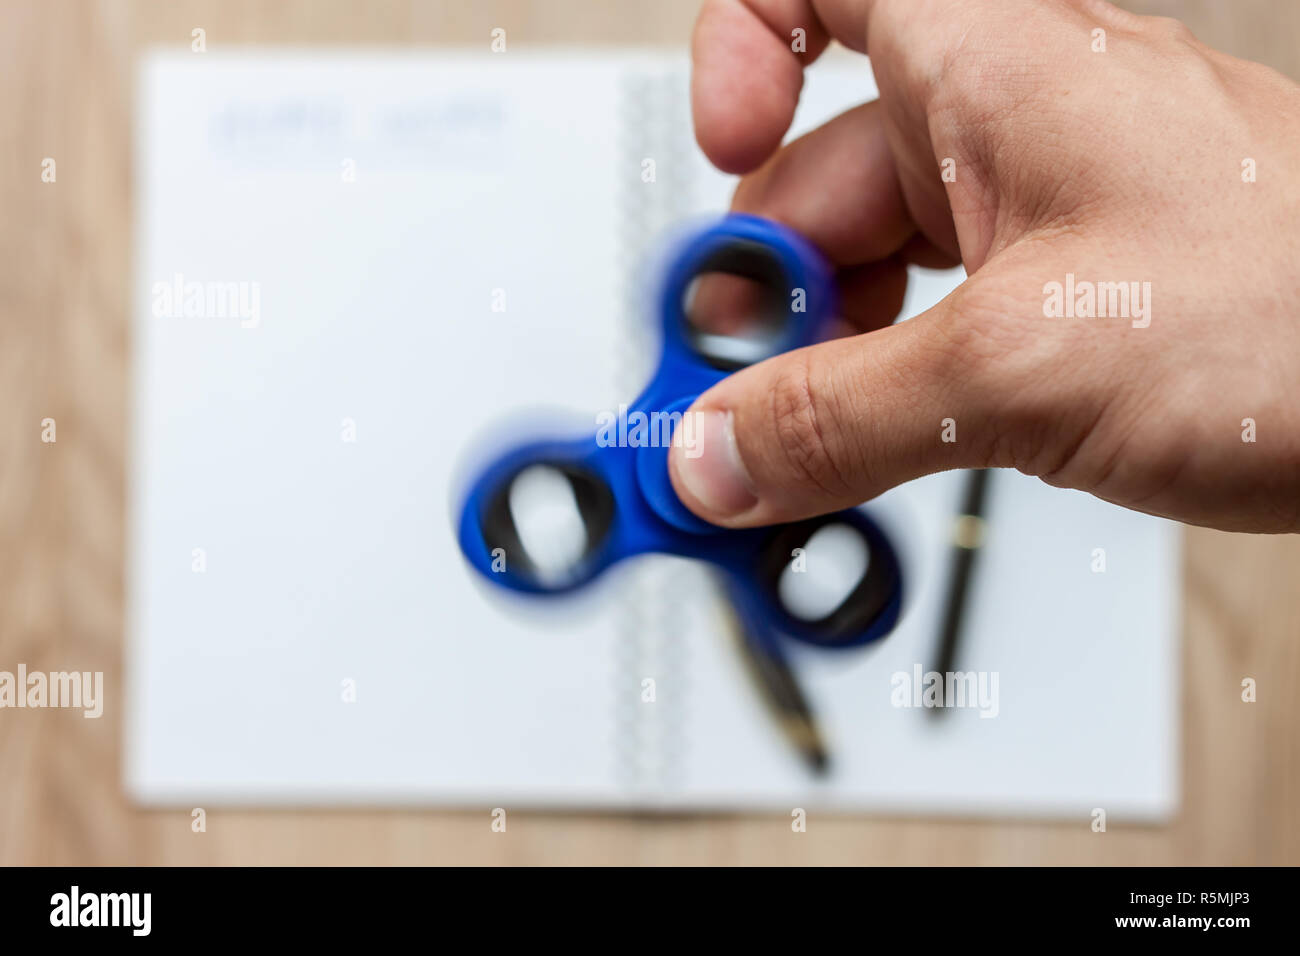 open notebook for home work distracting spinner Stock Photo